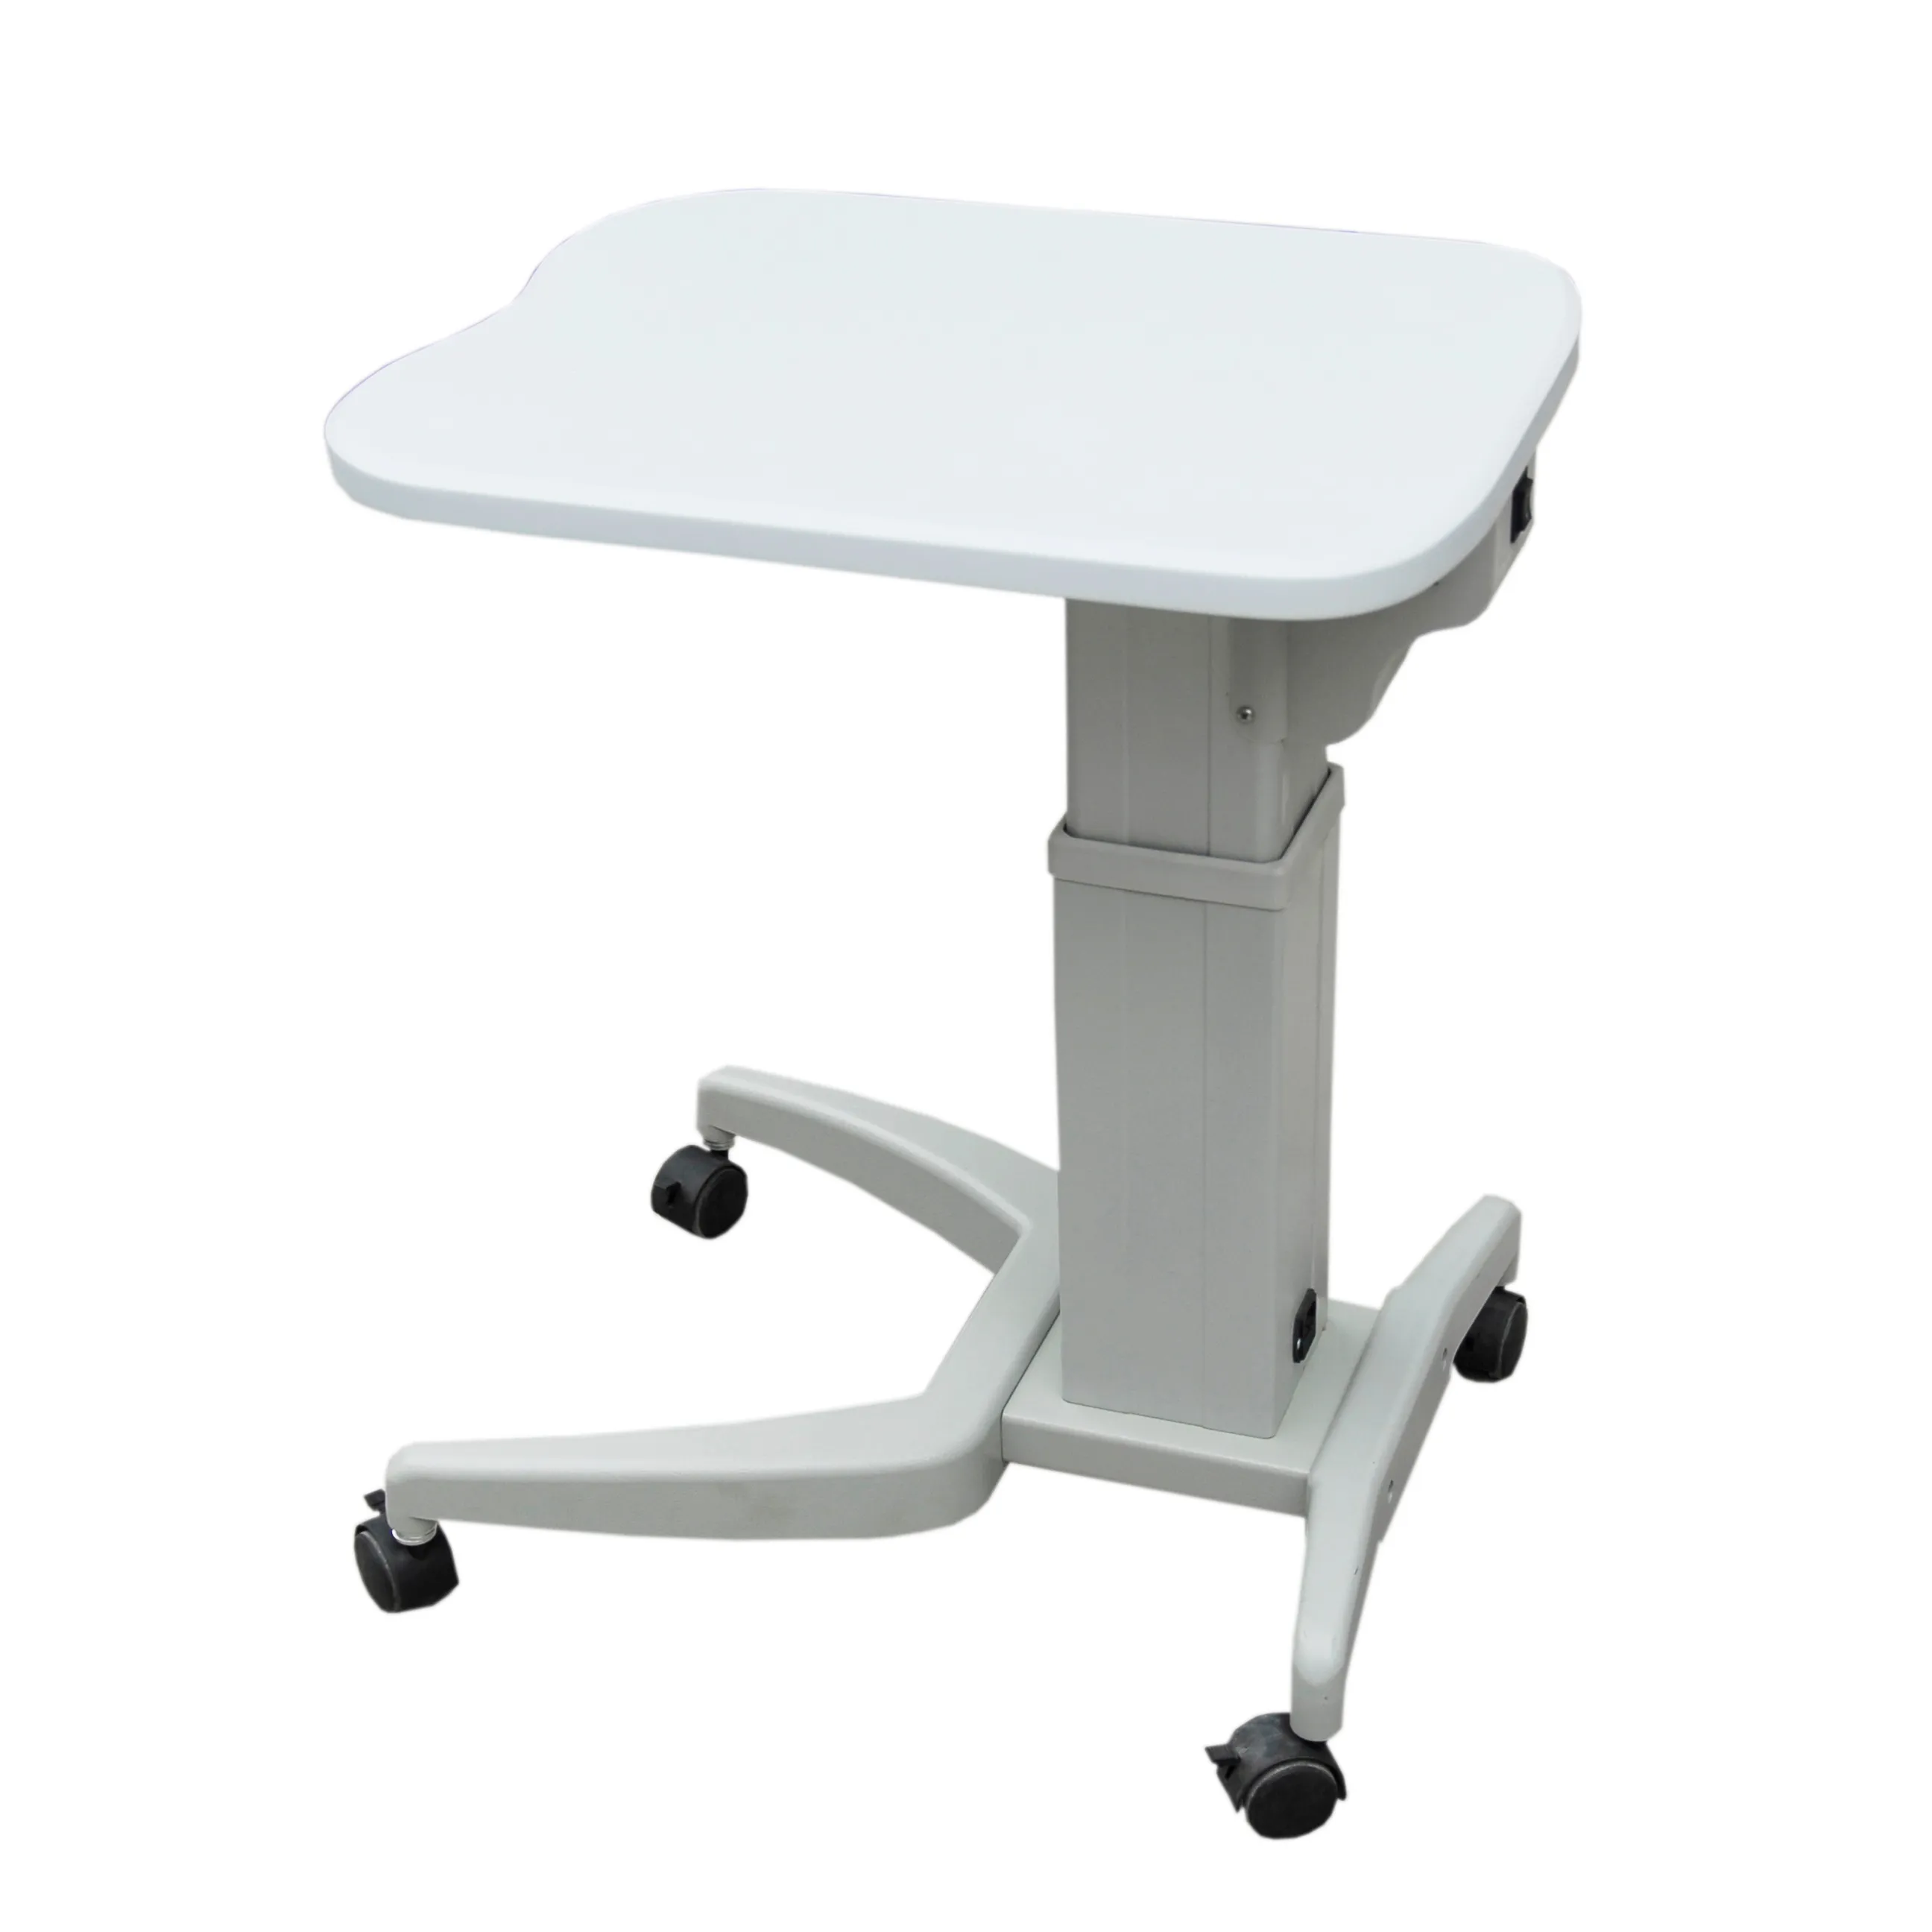 Professional Hospital Use Instrument Table TB-S120 58cm*47cm Adjustable Height with Motorized Adjustment Easy to Move